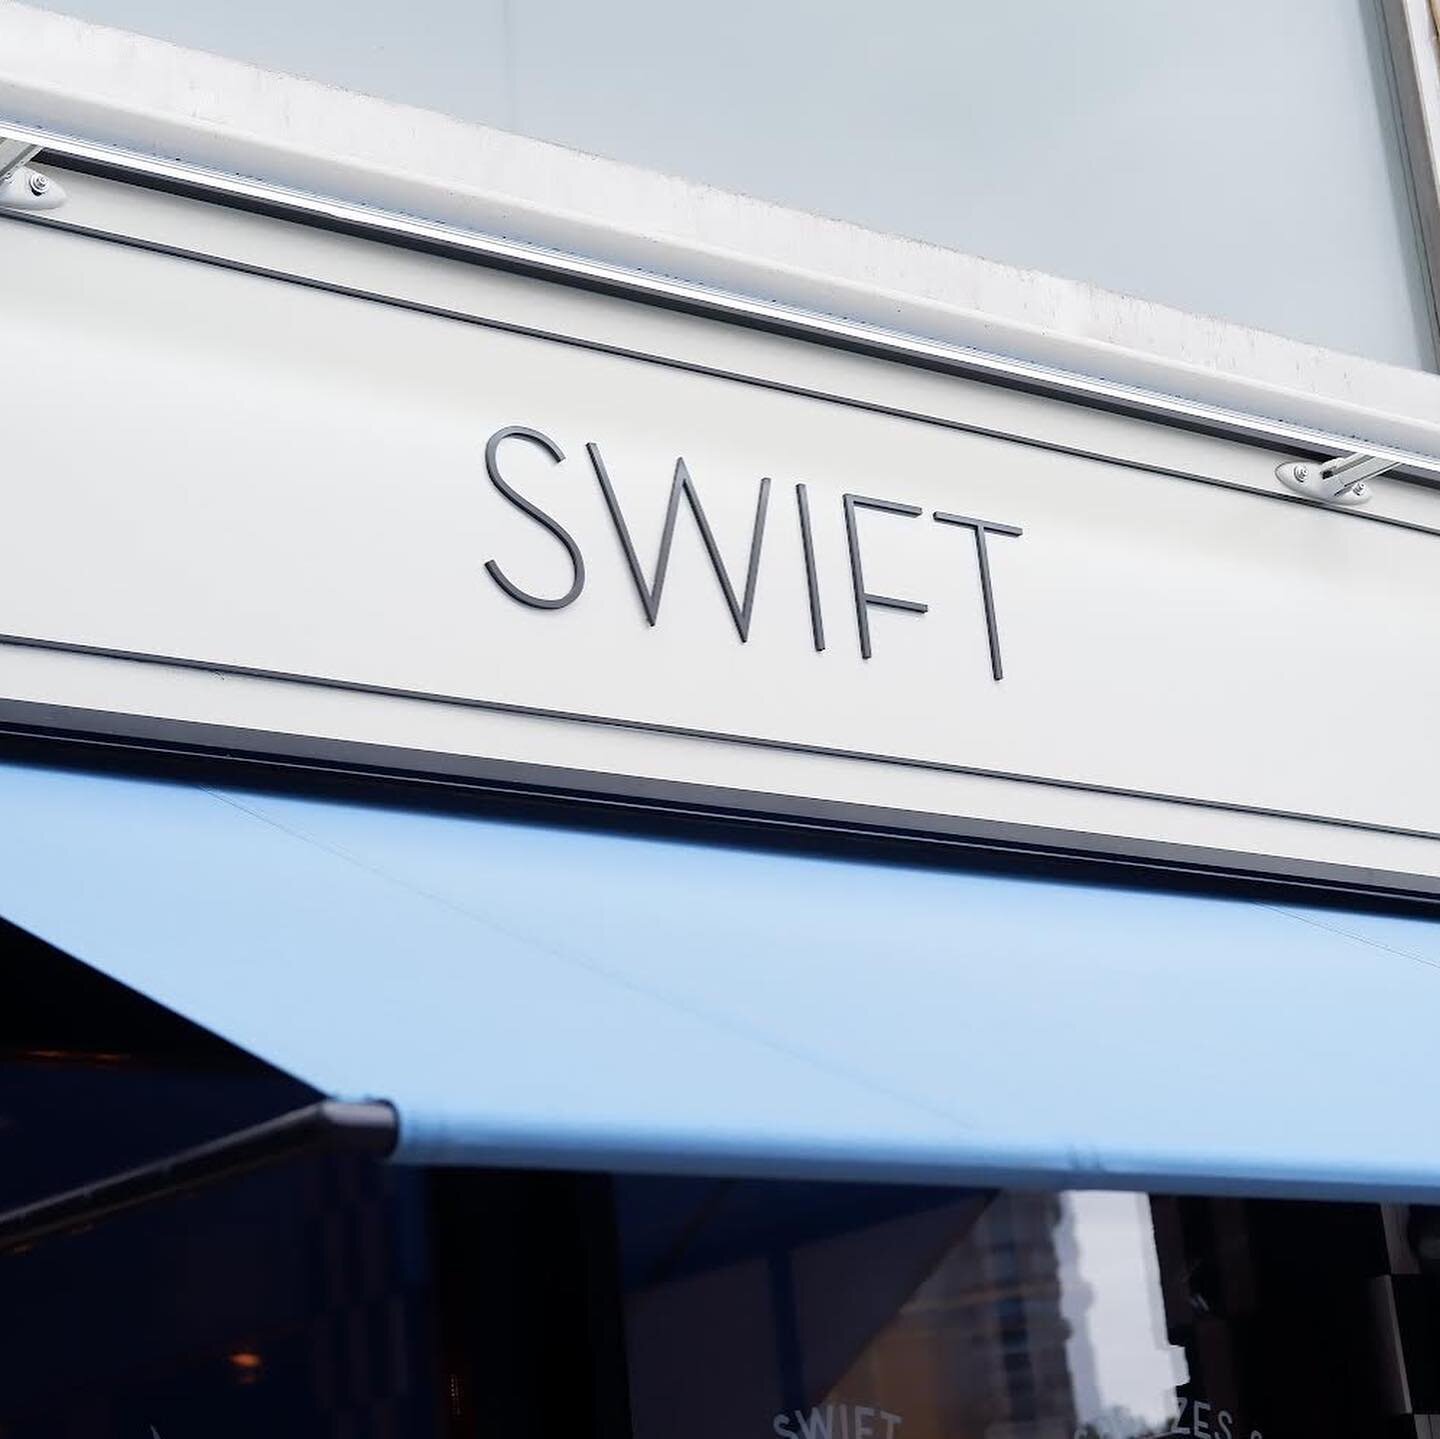 Say Hello to Swift Borough! 💫the latest addition from the internationally renowned Swift team.
This beautiful new bar has all the things we know and love from Swift Soho and Swift Shoreditch as well as some new bespoke cocktails 🍸
Swift Borough als